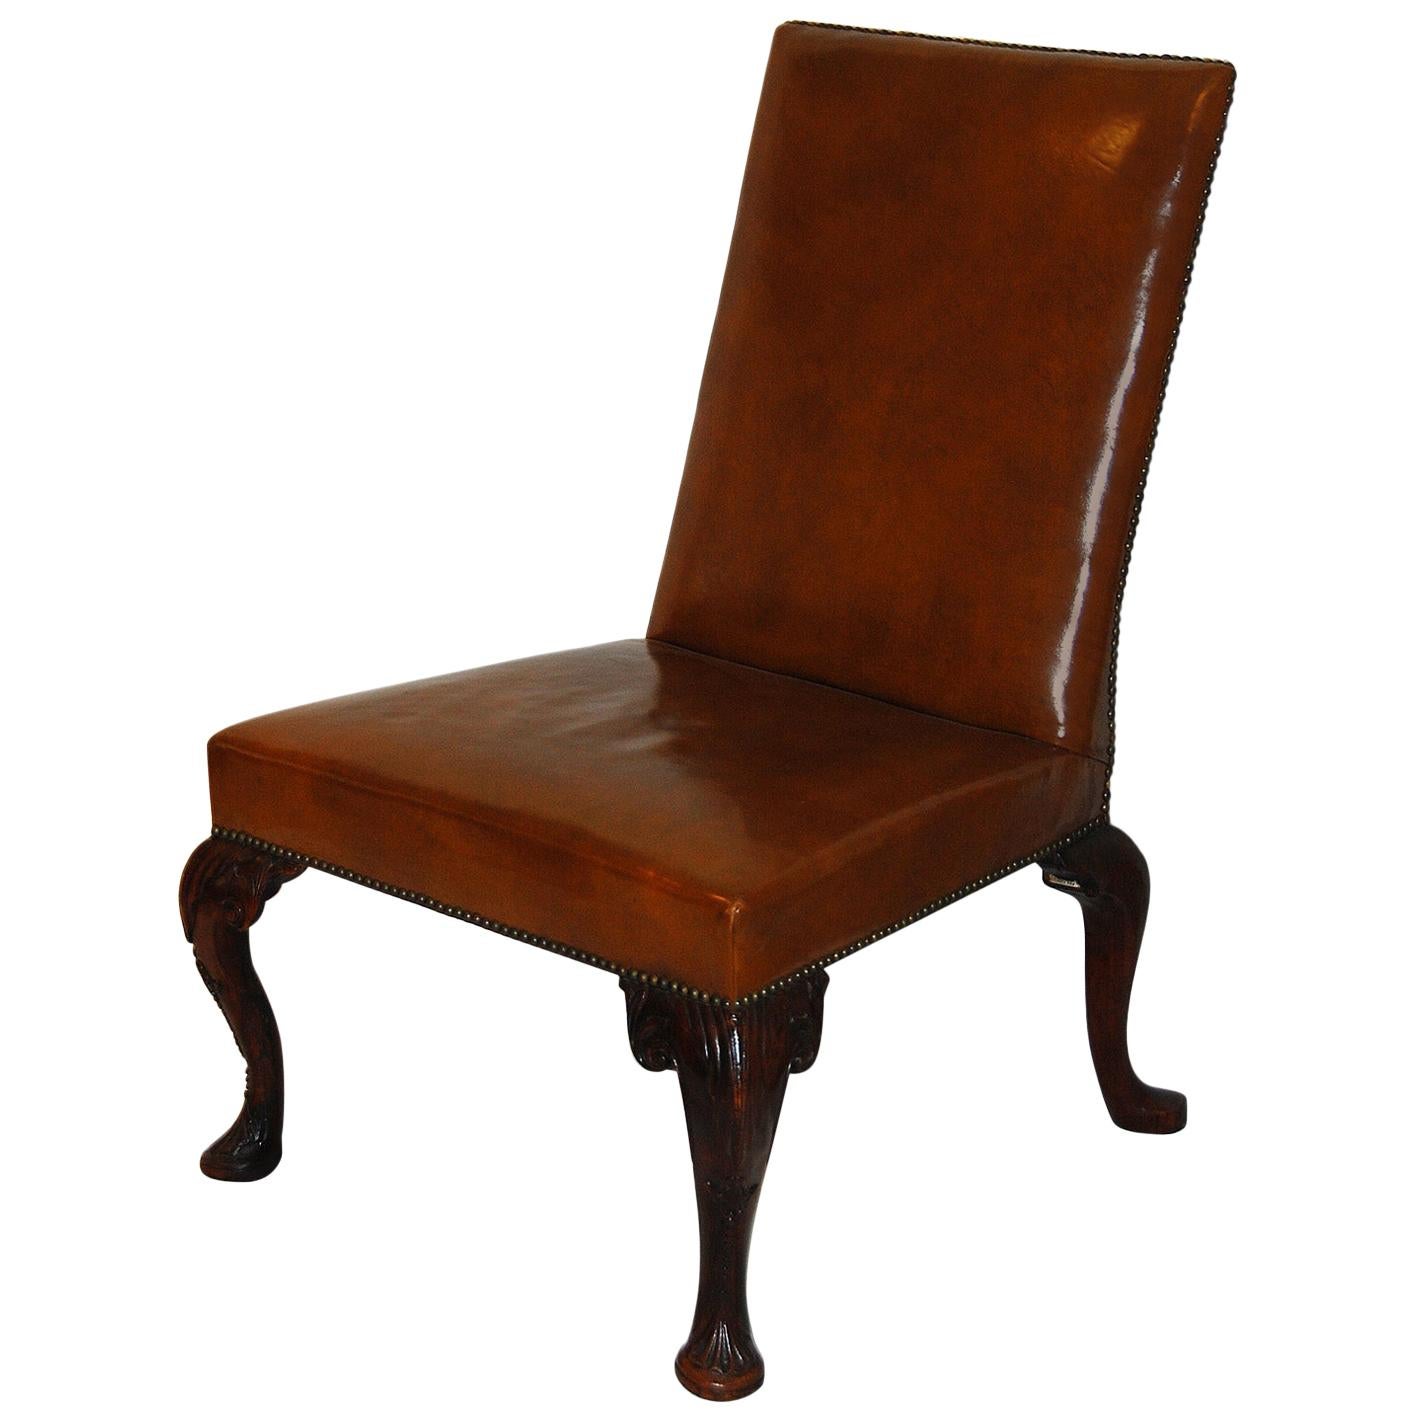 English George II Period Leather Lounging Chair, Backstool, Walnut Cabriole Legs For Sale